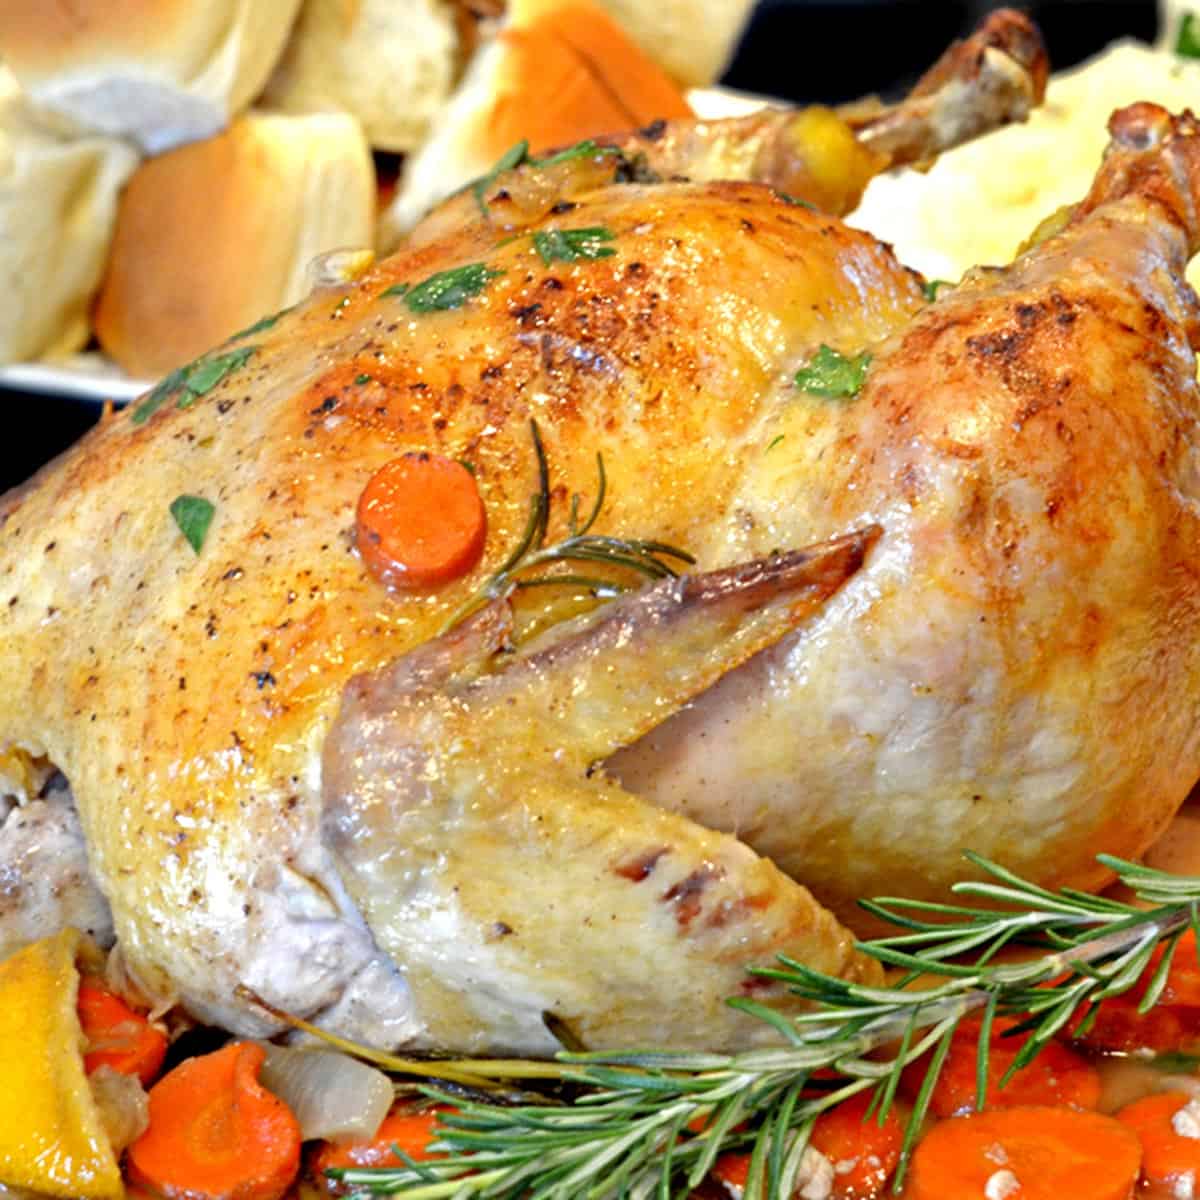 A roasted chicken with vegetables.